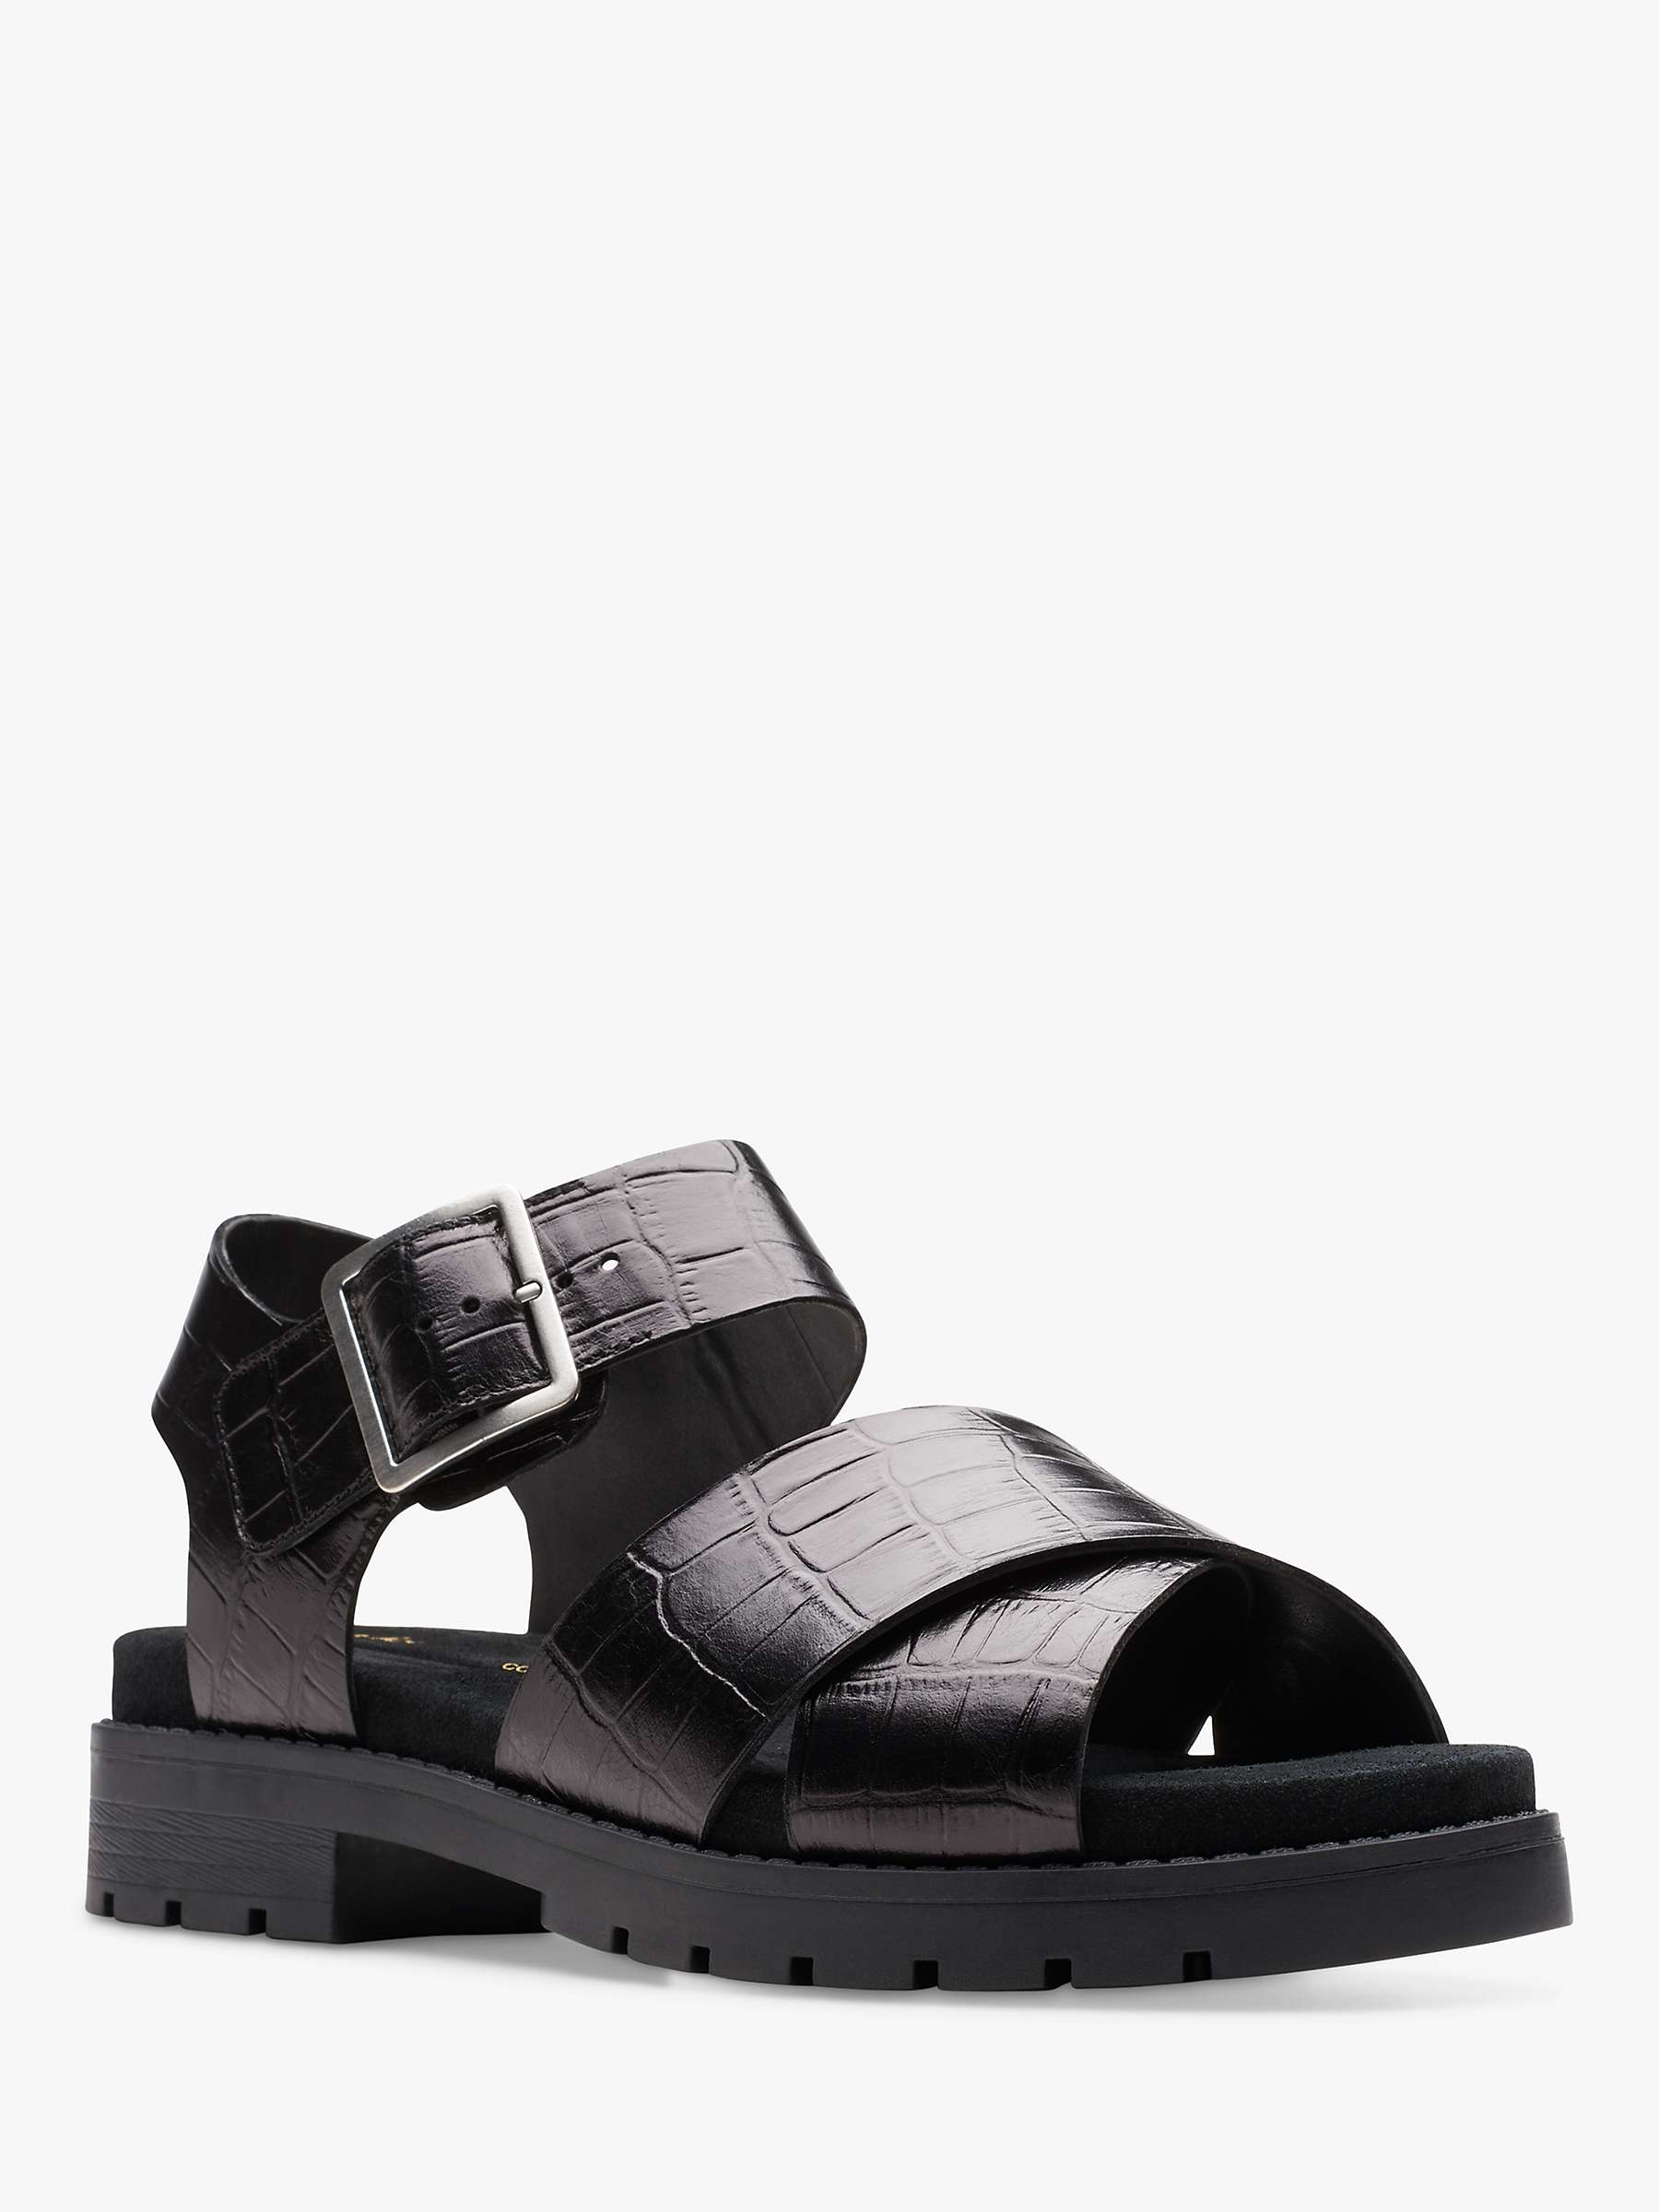 Buy Clarks Orinocco Wide Fit Textured Leather Cross Strap Sandals, Black Online at johnlewis.com